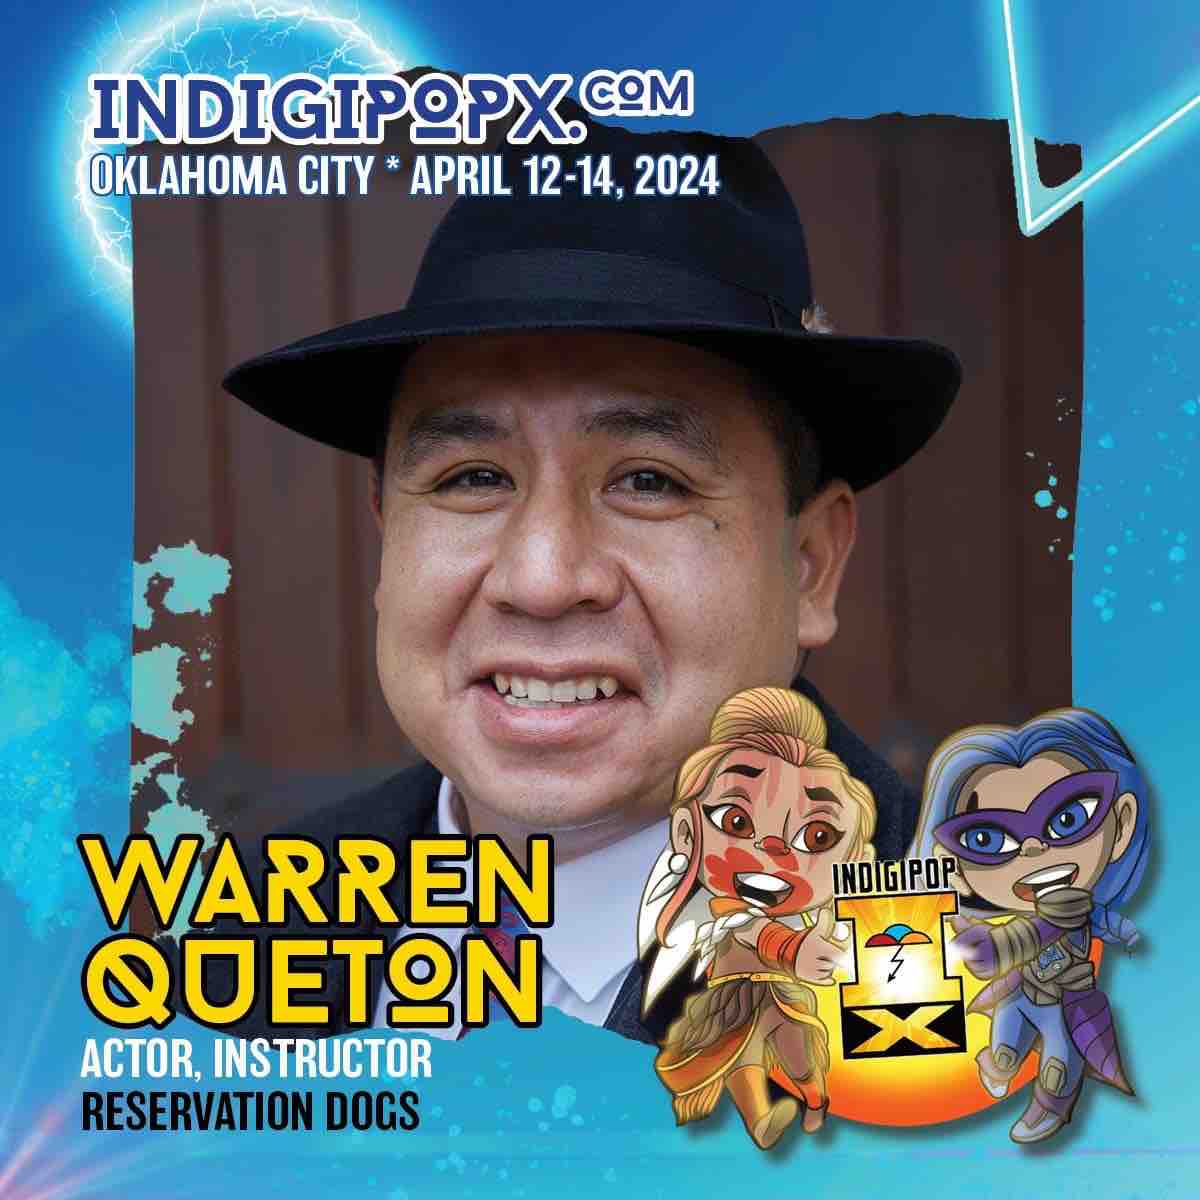 Education Day at #IndigipopX2024 includes the Nerd49 Hand-Drum Contest w/ WARREN QUETON, Clinton from RESERVATION DOGS! Friday afternoon  at the Xchange!

📍 First Americans Museum 
📅 April 12-14, 2024
🎟️ indigipopx.com (tix + info)

#OKC #AttentionIndiginerds l